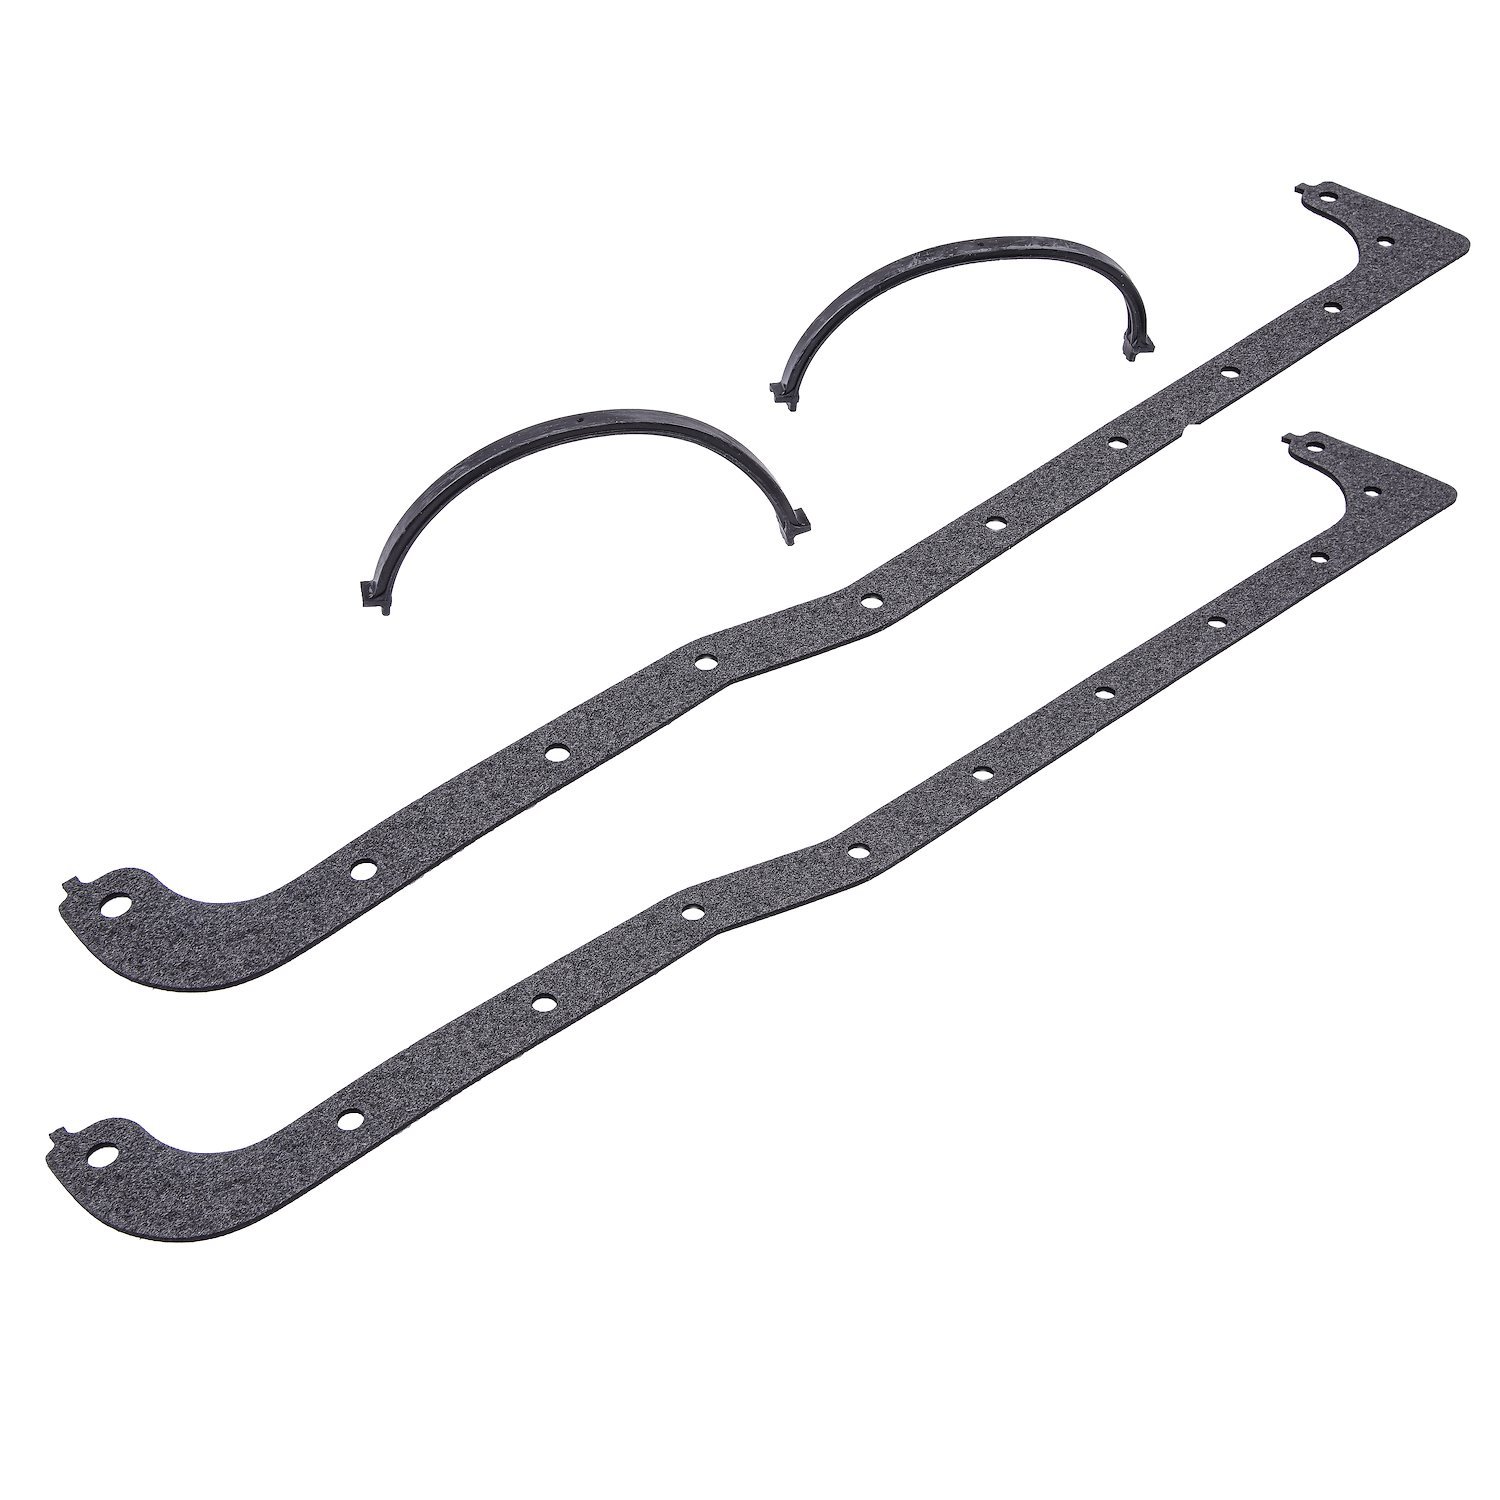 Oil Pan Gasket Set for 1962-1995 Small Block Ford